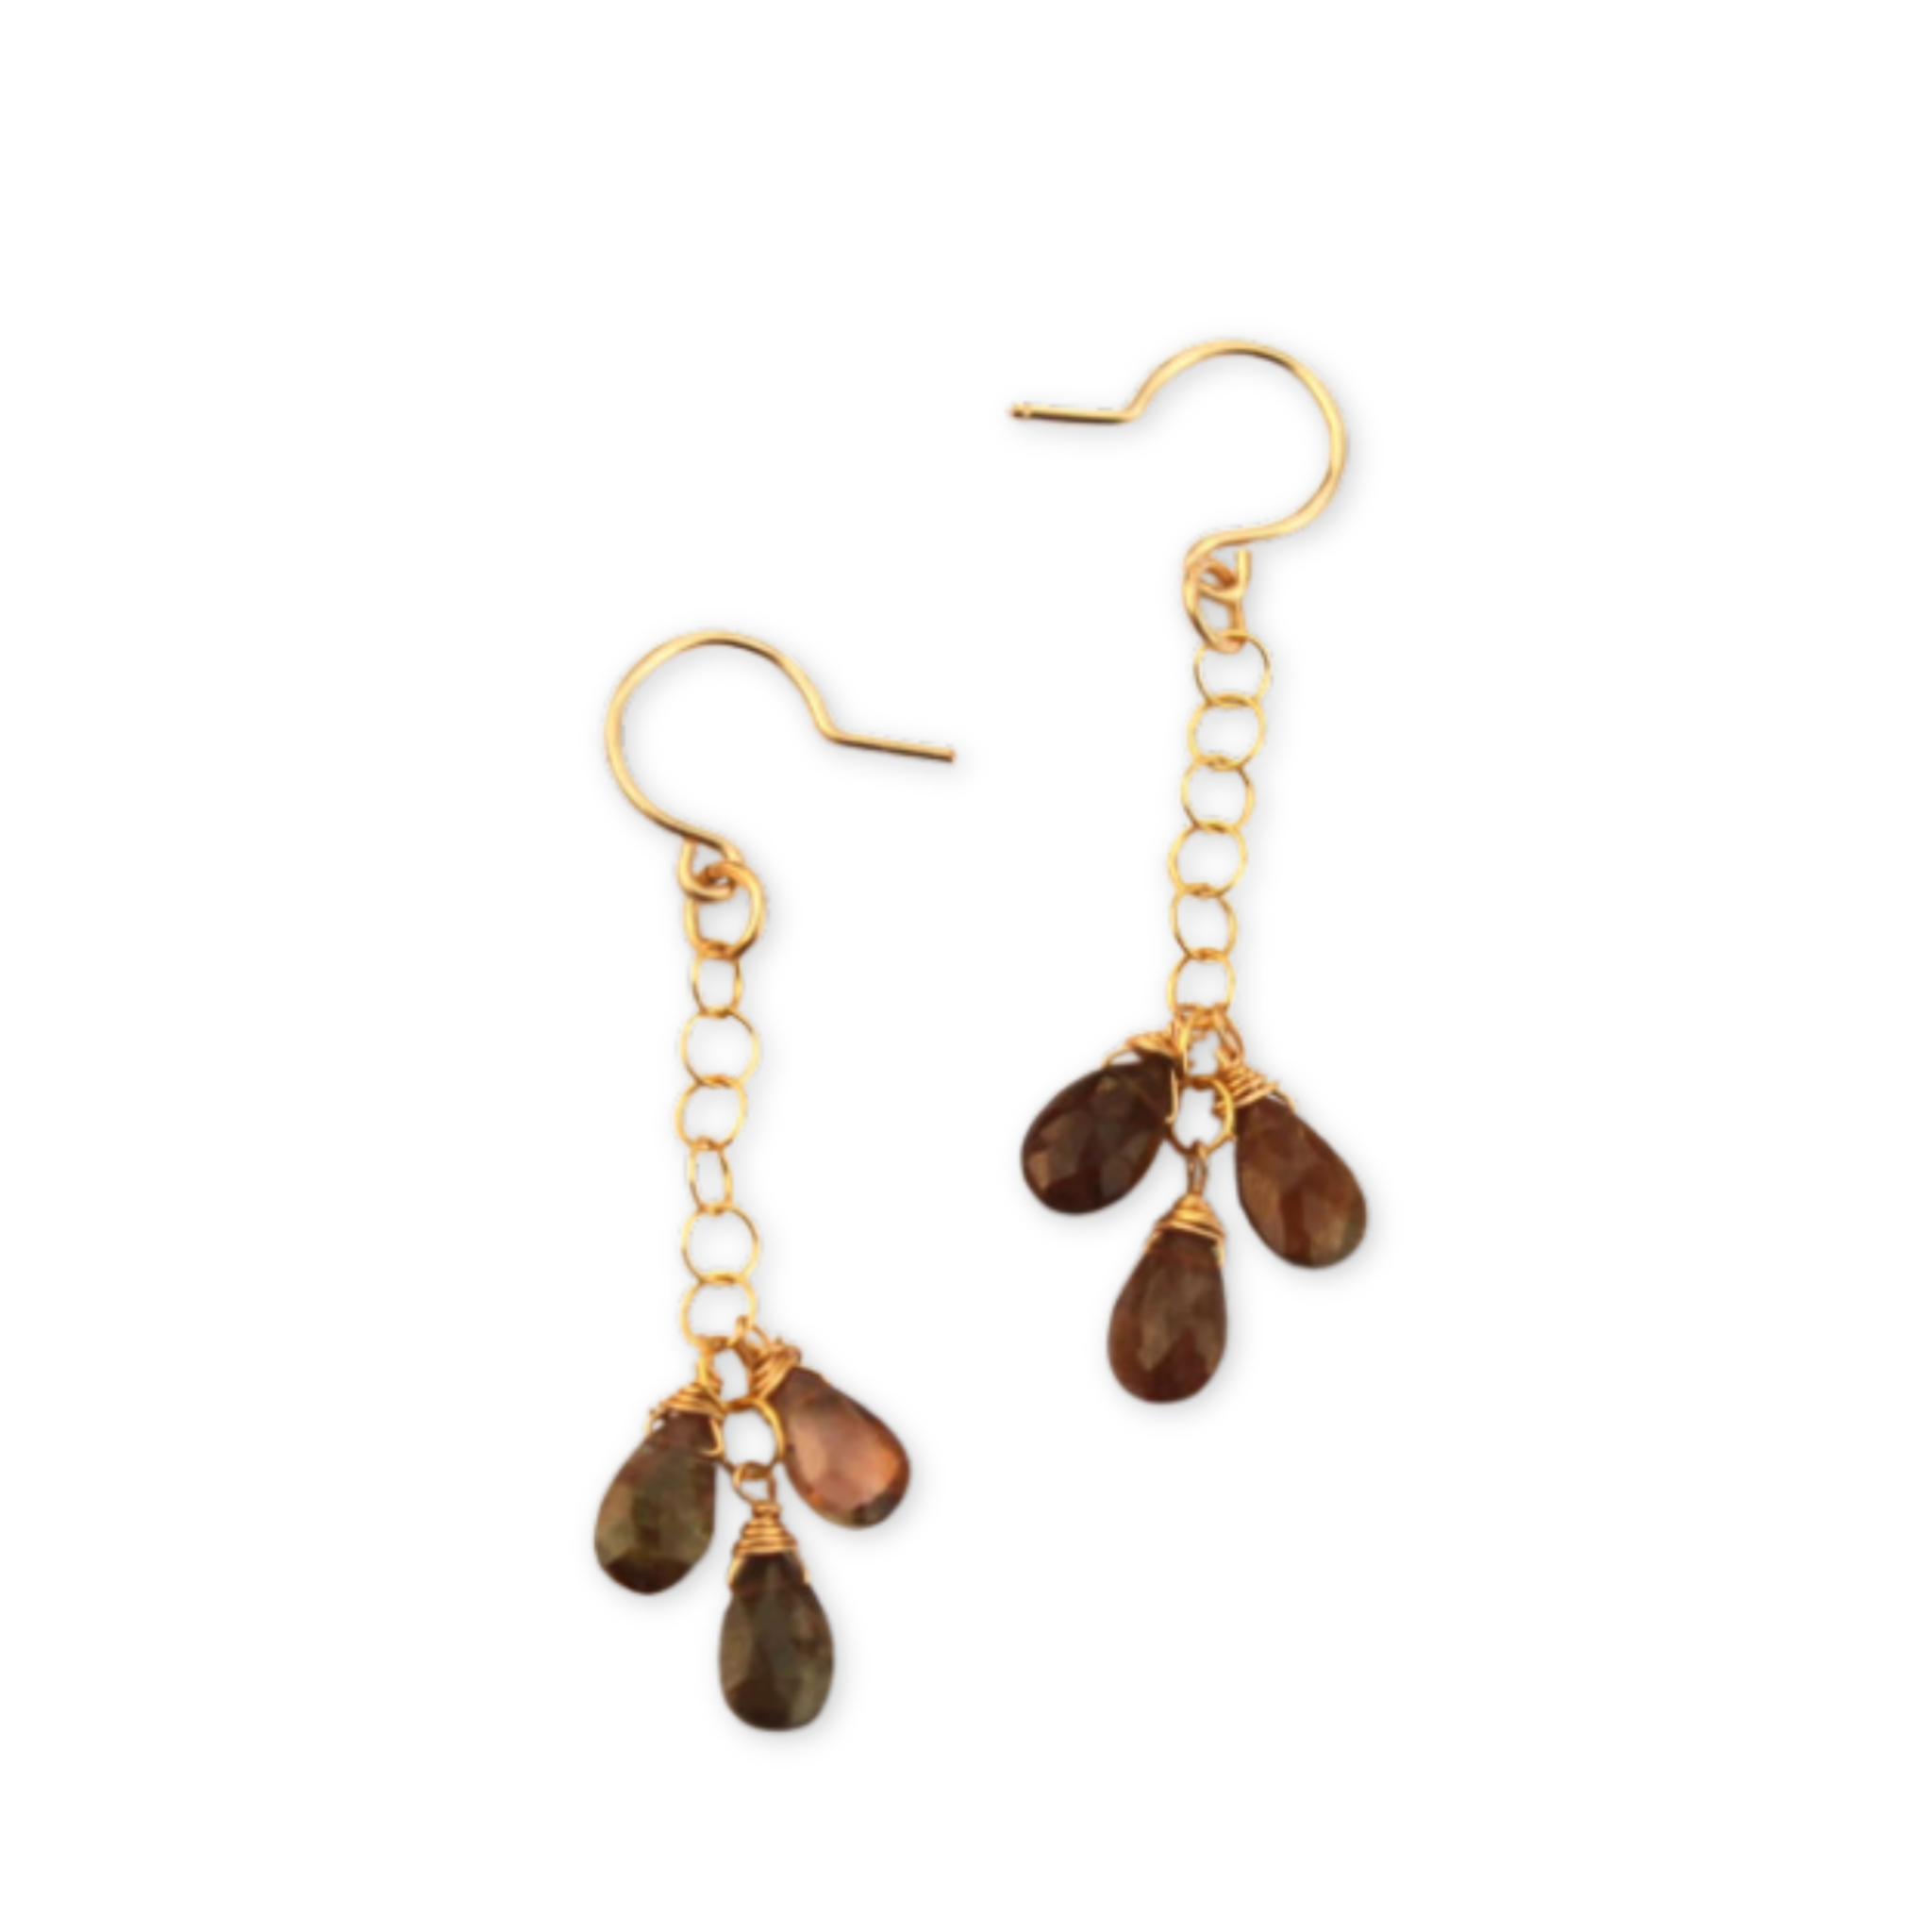 earrings made from three faceted briolettes hanging from a delicate chain